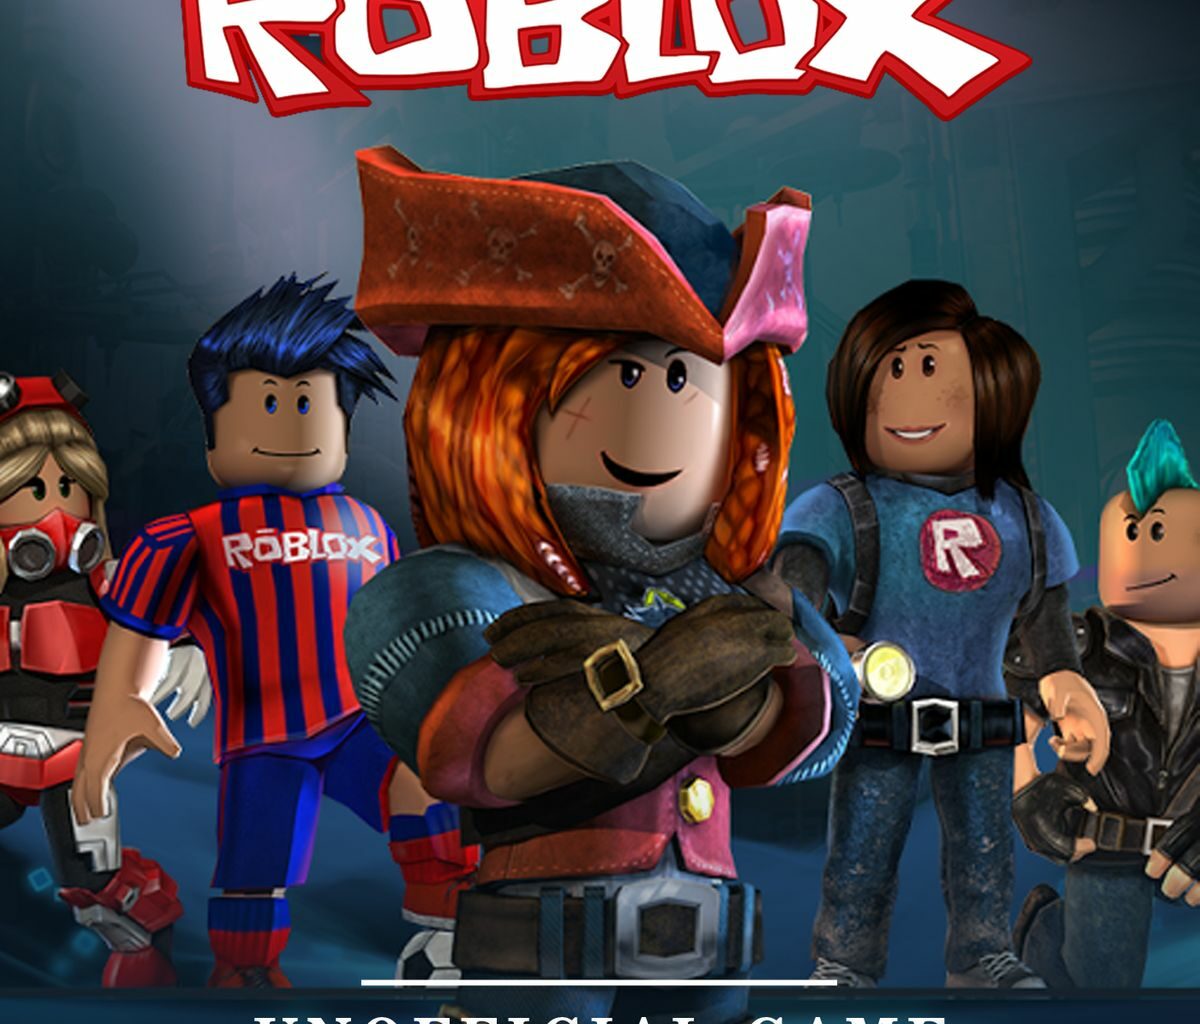 Roblox PS4 Latest News and Rumors in 2021